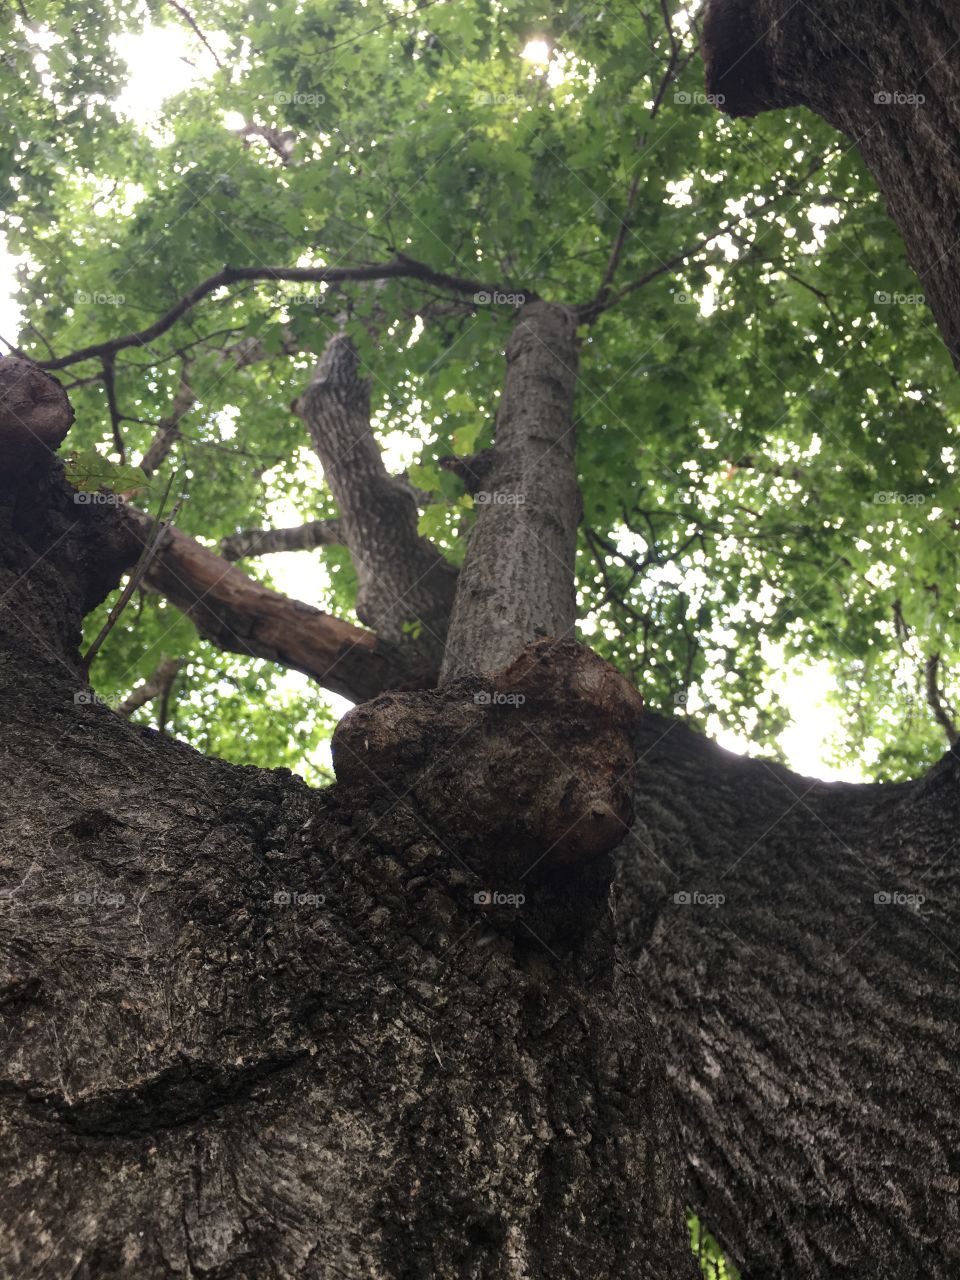 Looking up into a very tall tree, large knot on tree trunk, green leaves, summer foliage 